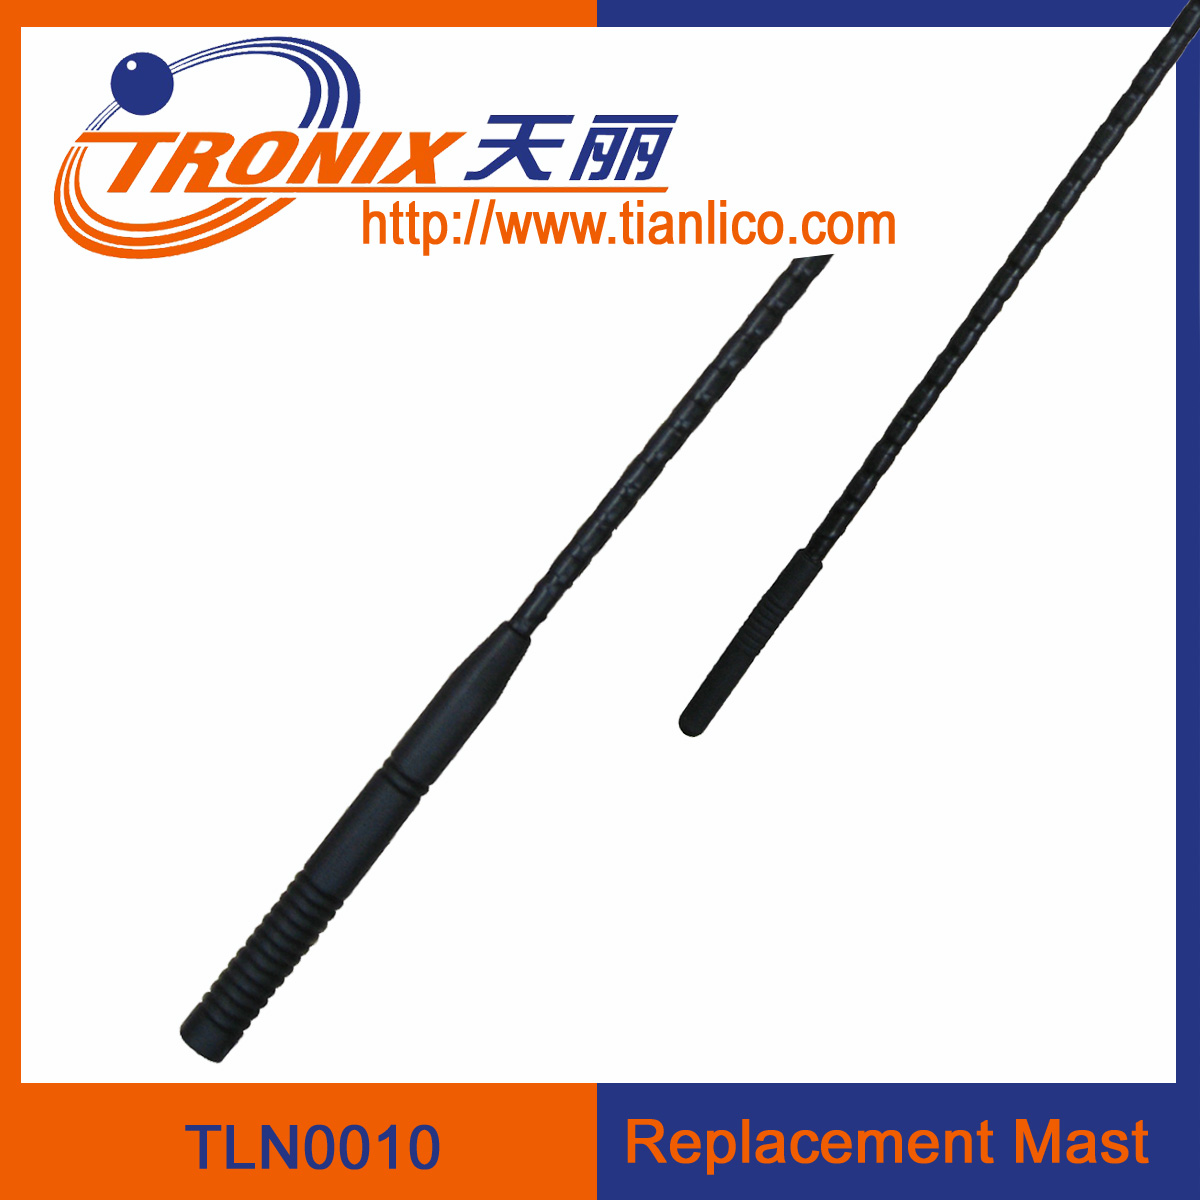 Cheap car replacement mast antenna/ 1 section mast car antenna/ car antenna accessories TLN0010 for sale